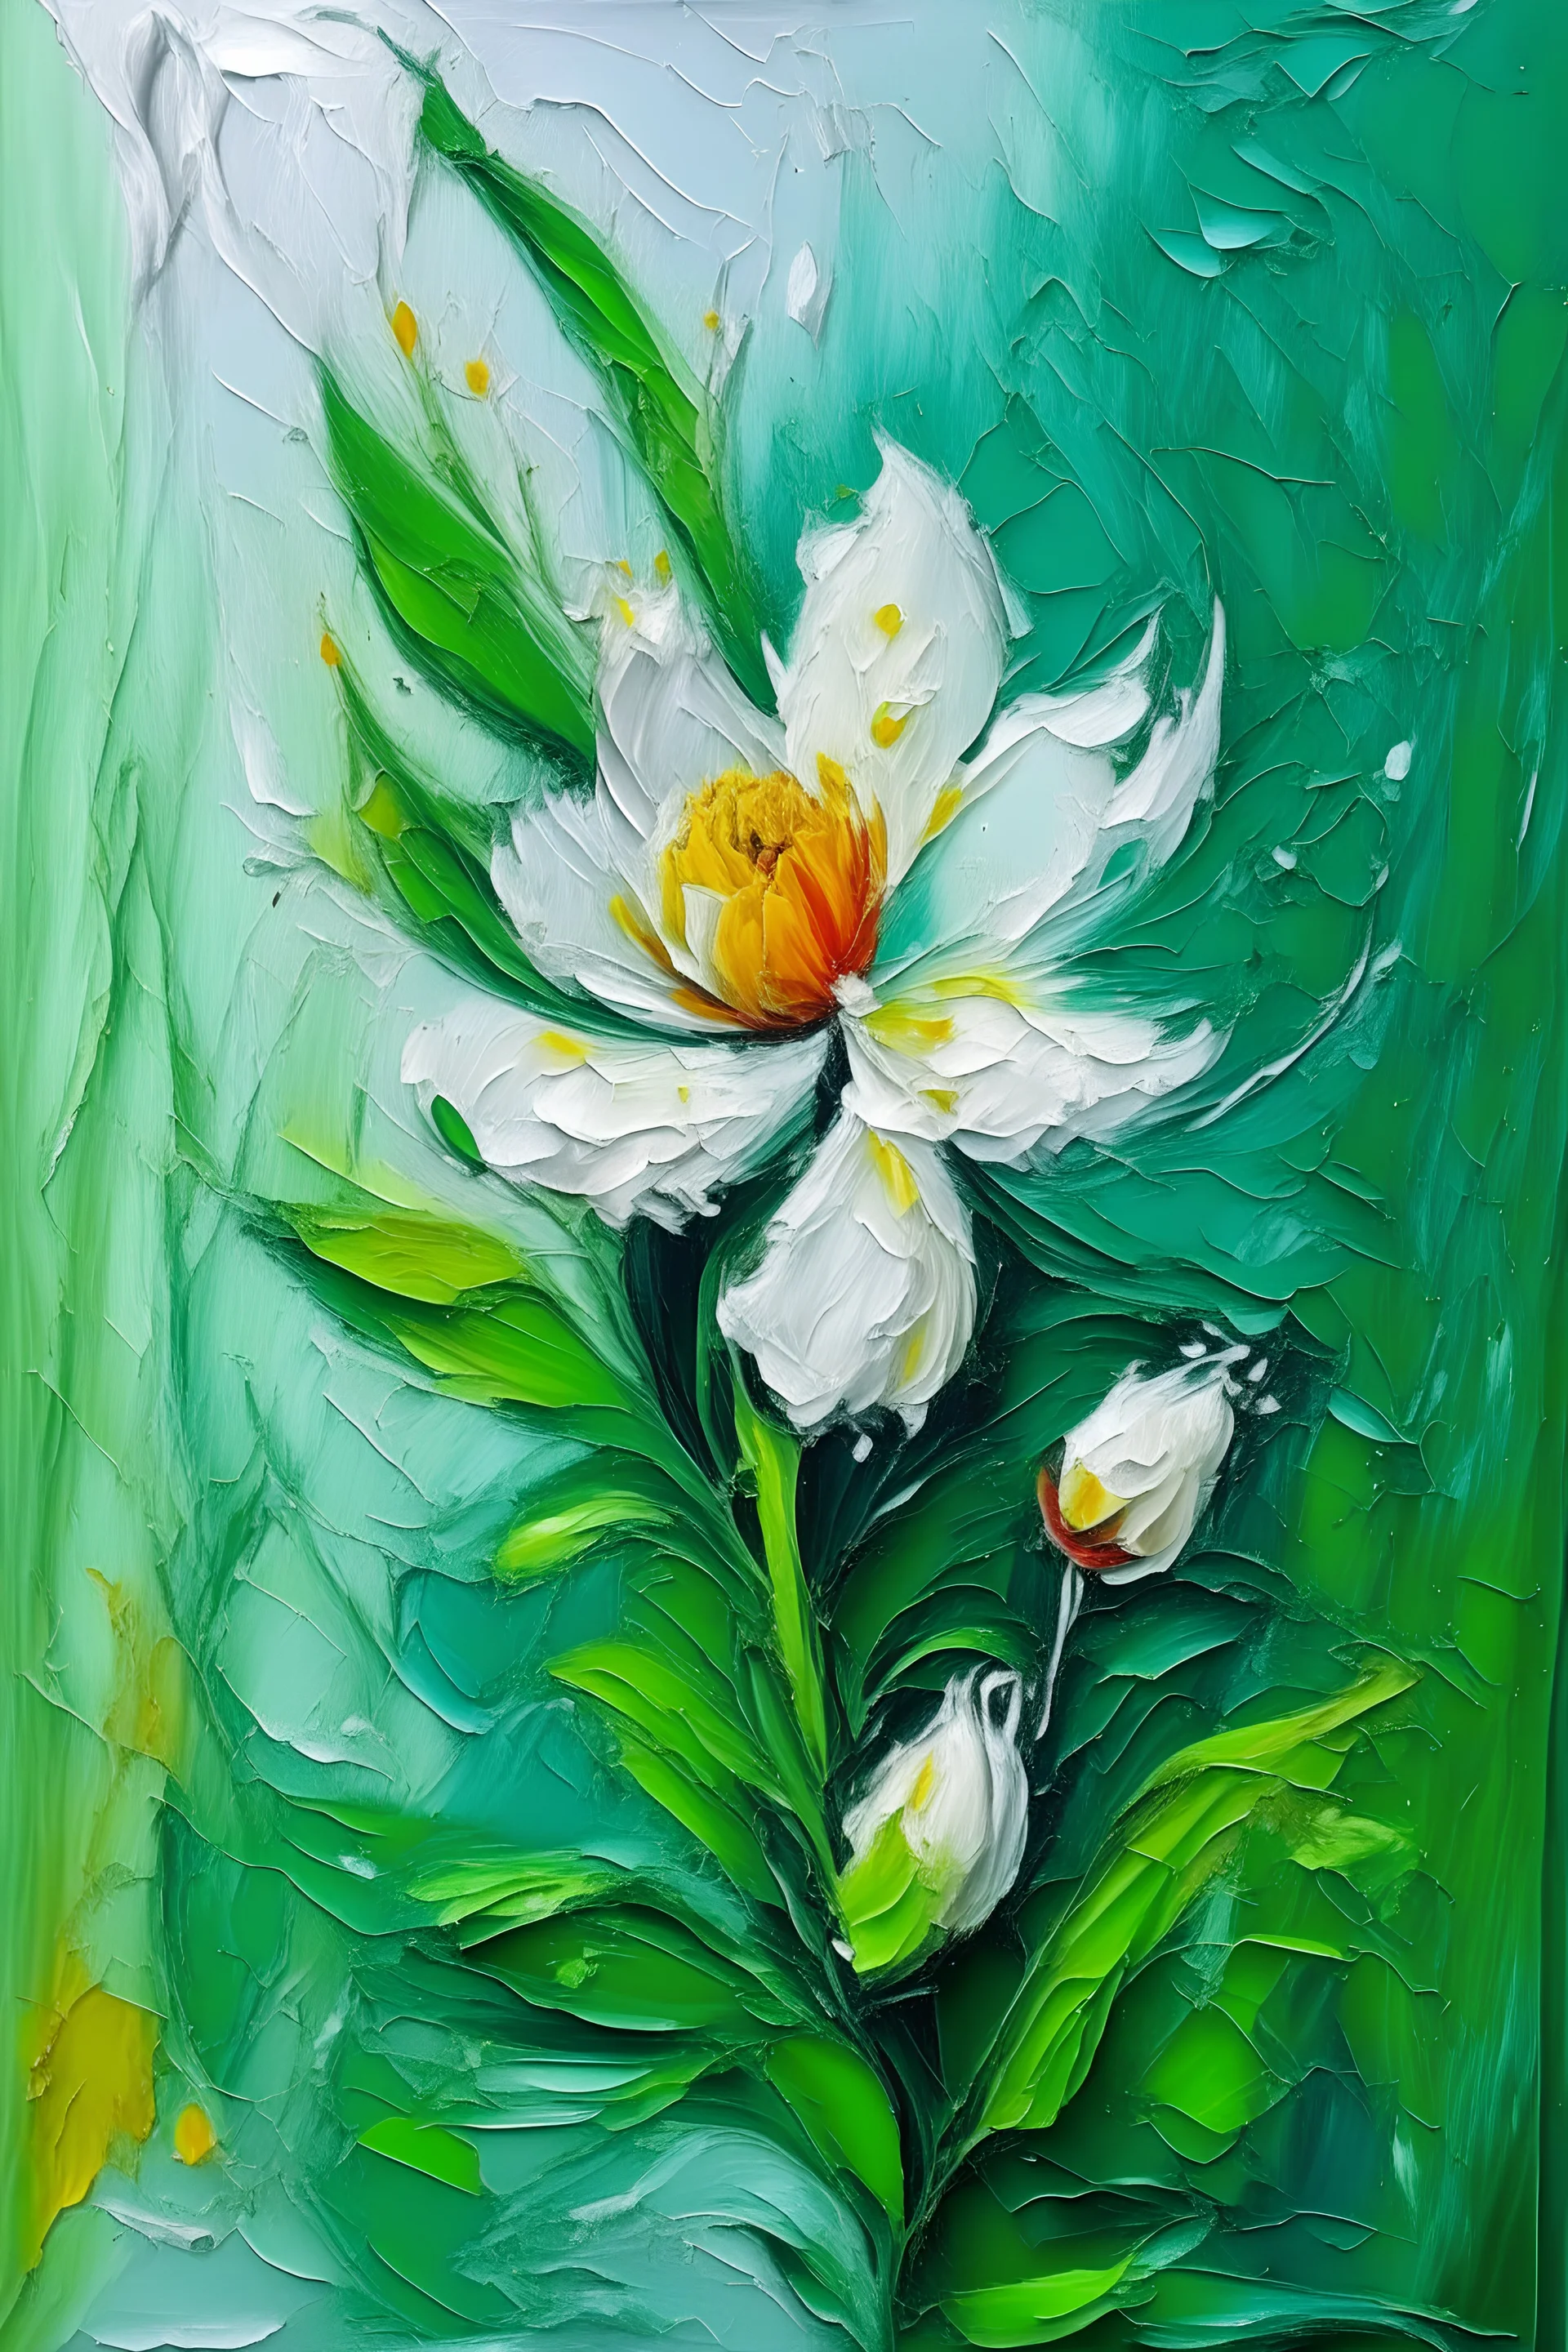 Ambrosia flower oil painting with knife technique on white and green background